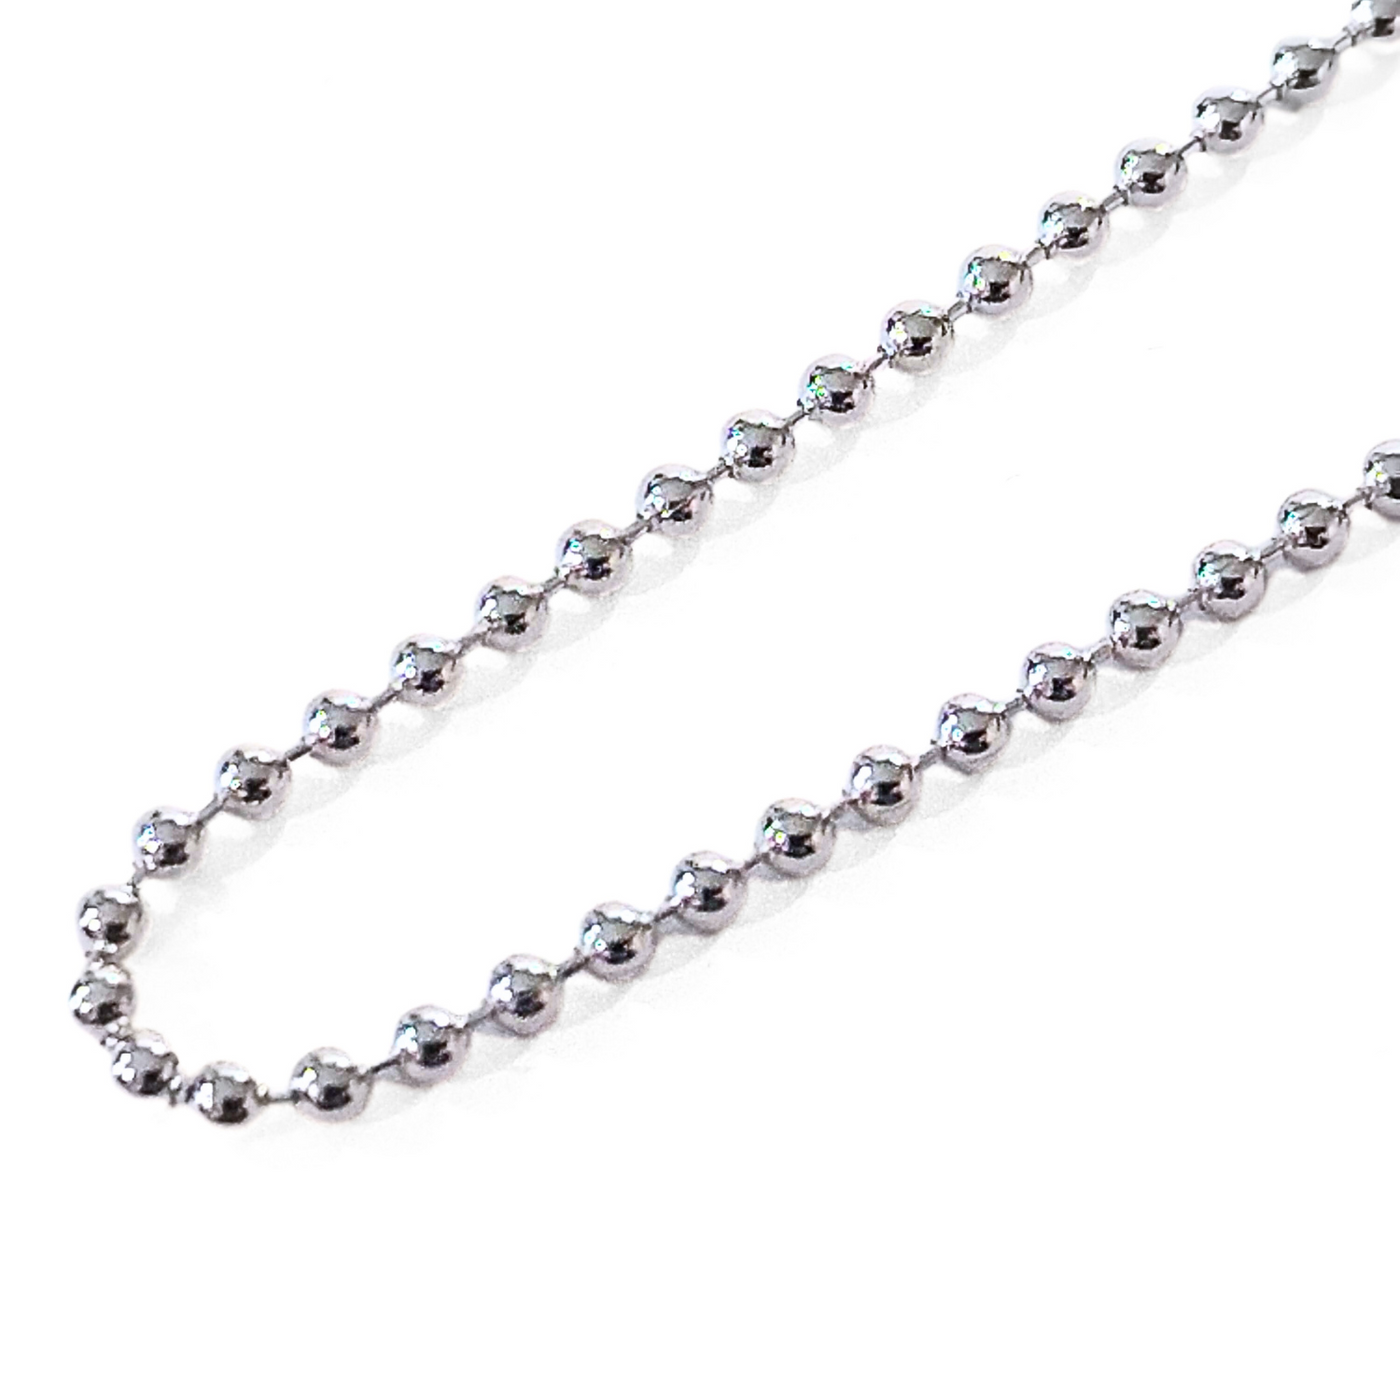 24" 2mm Bead Chain (Sterling Silver)